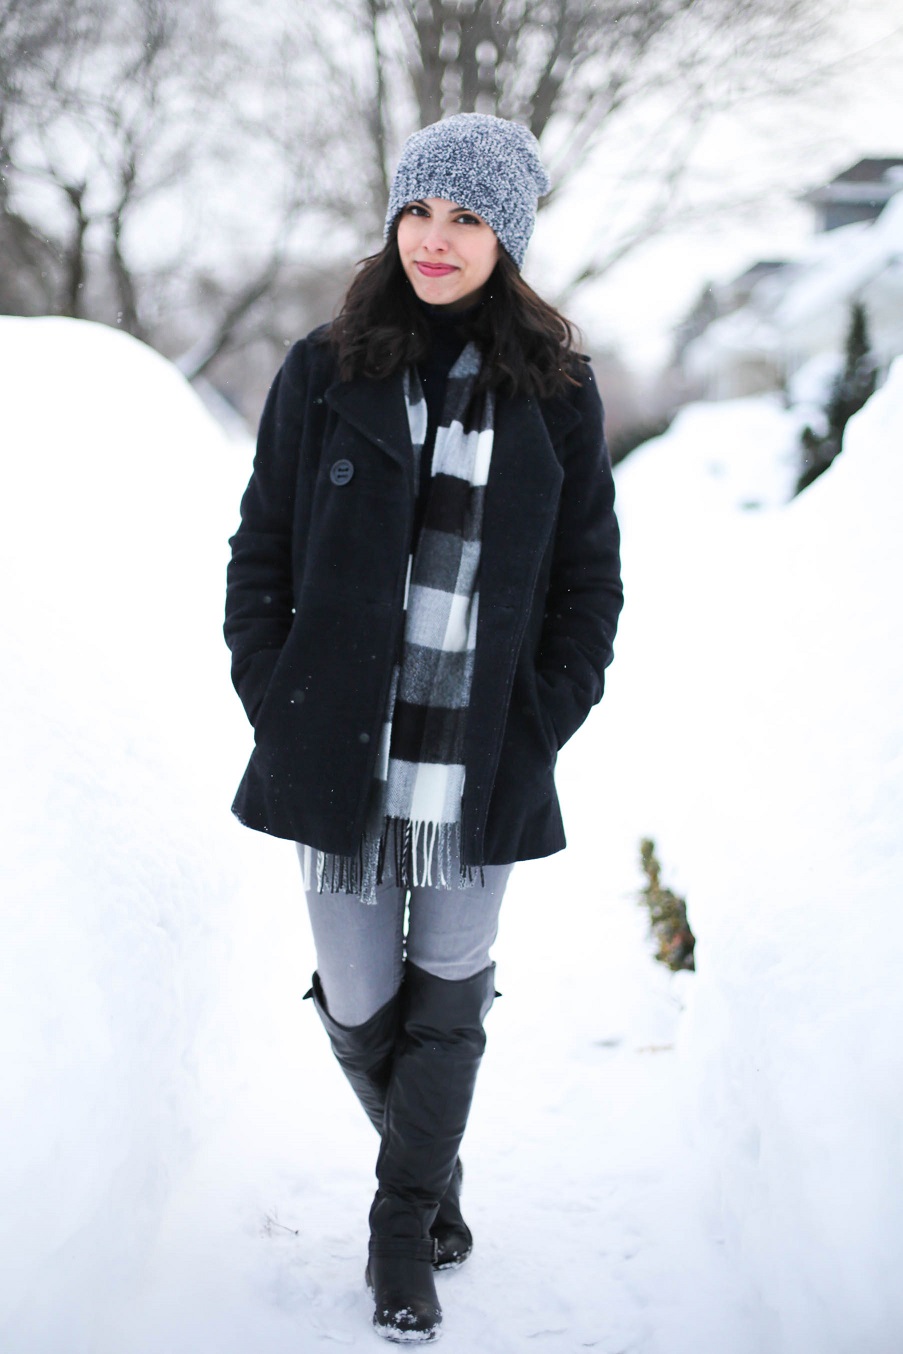 austin style blogger, casual winter look ideas, forever 21 beanie, plaid scarf, H&M grey denim jeans, austin texas style blogger, austin fashion blogger, austin texas fashion blog